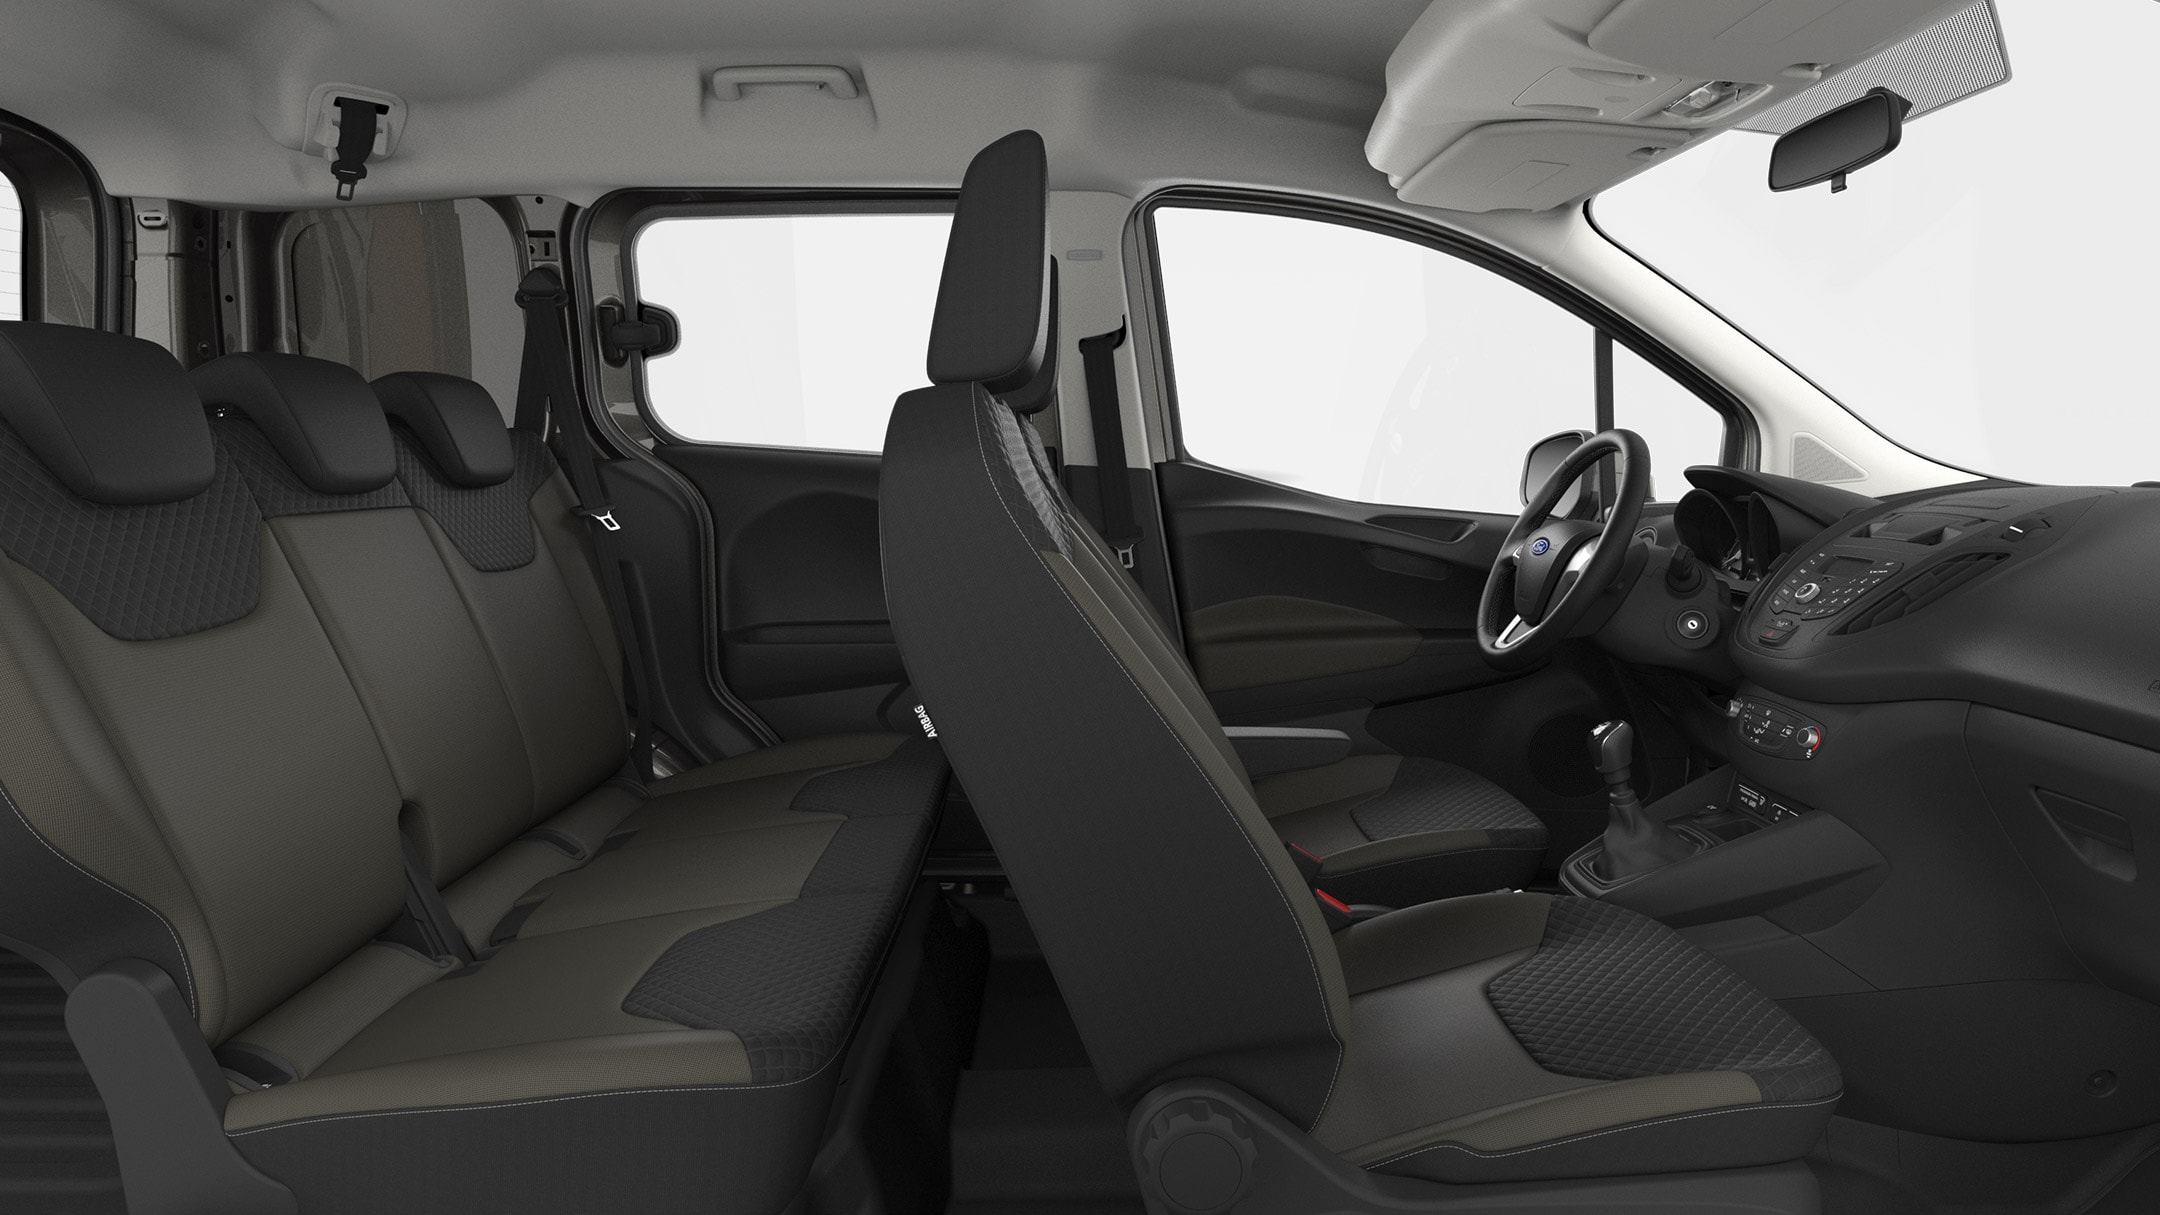 Ford Transit Courier interior with seats